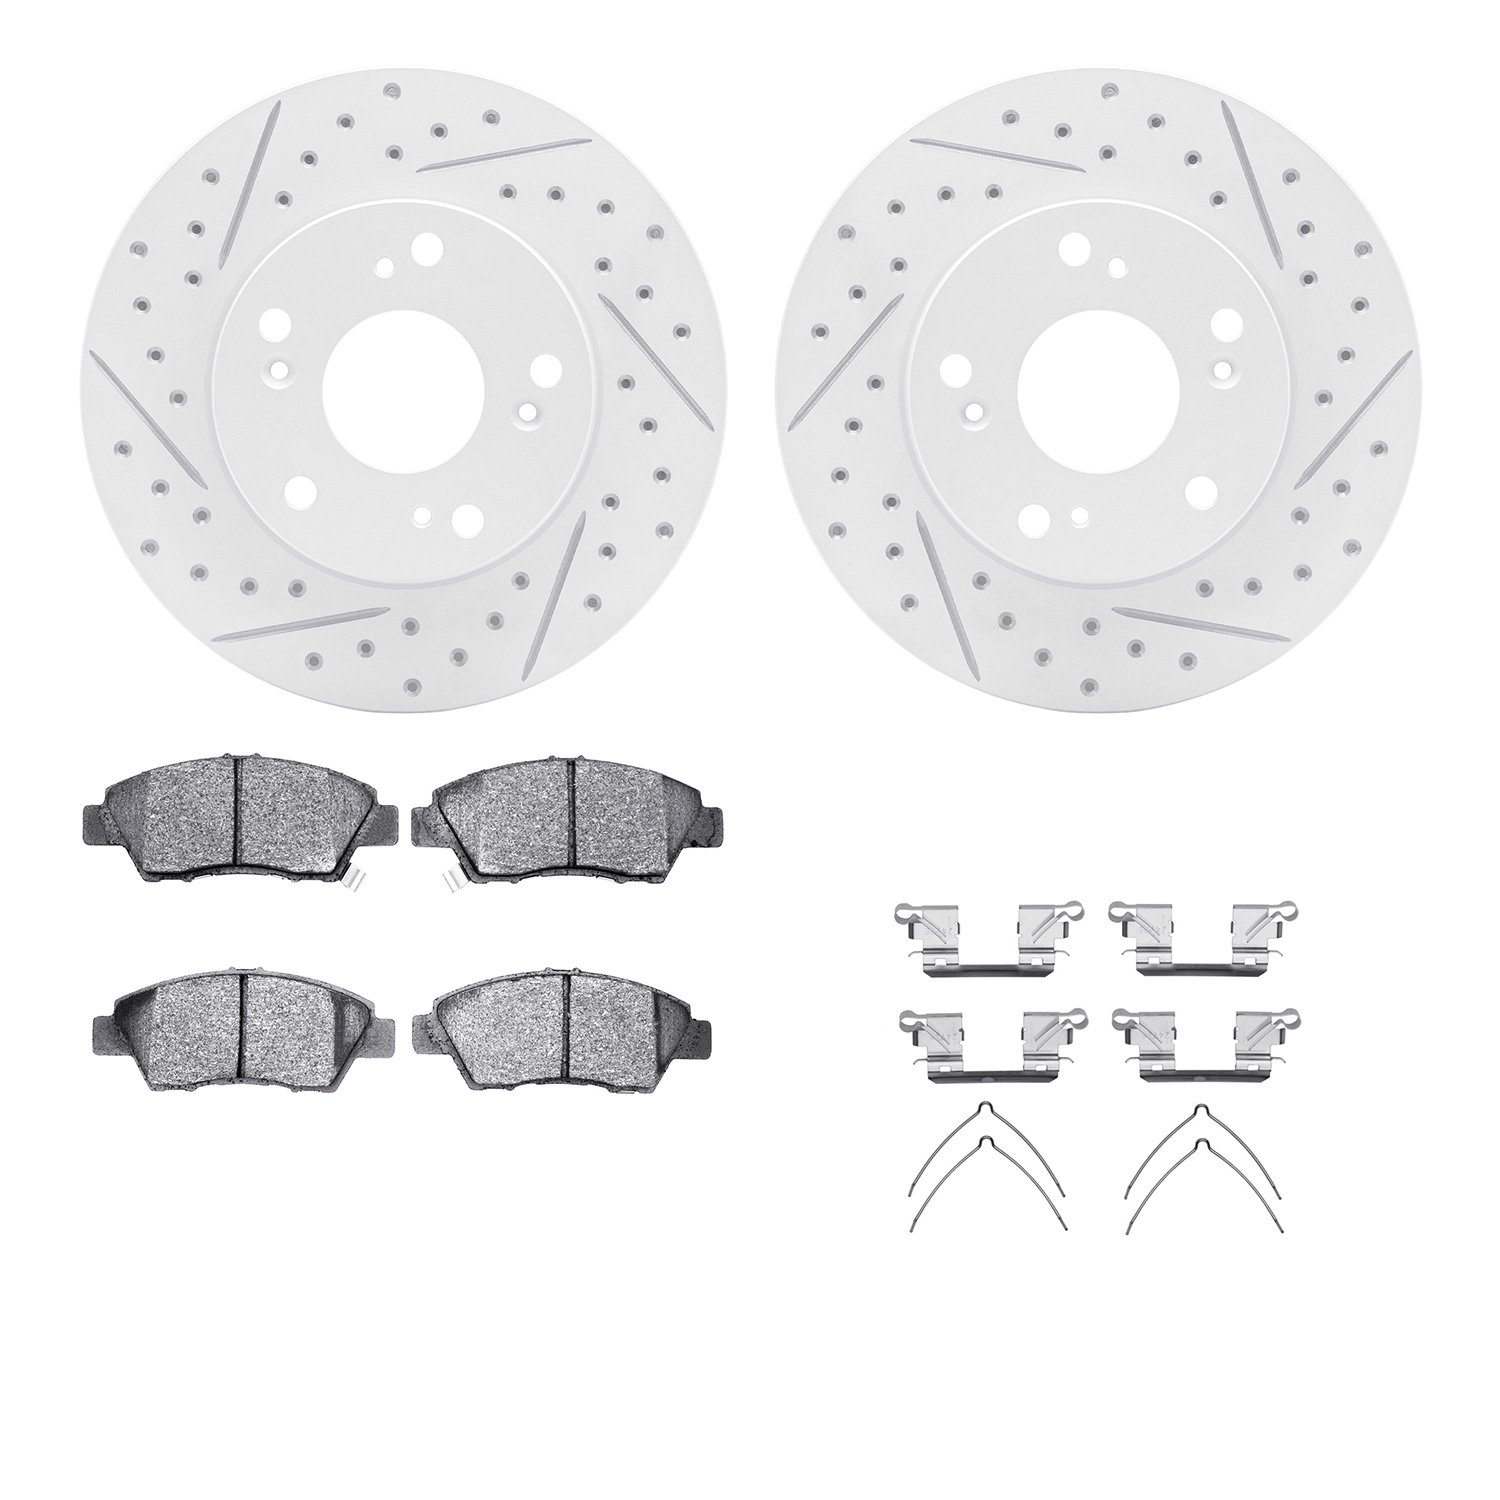 2512-59030 Geoperformance Drilled/Slotted Rotors w/5000 Advanced Brake Pads Kit & Hardware, 2011-2015 Acura/Honda, Position: Fro